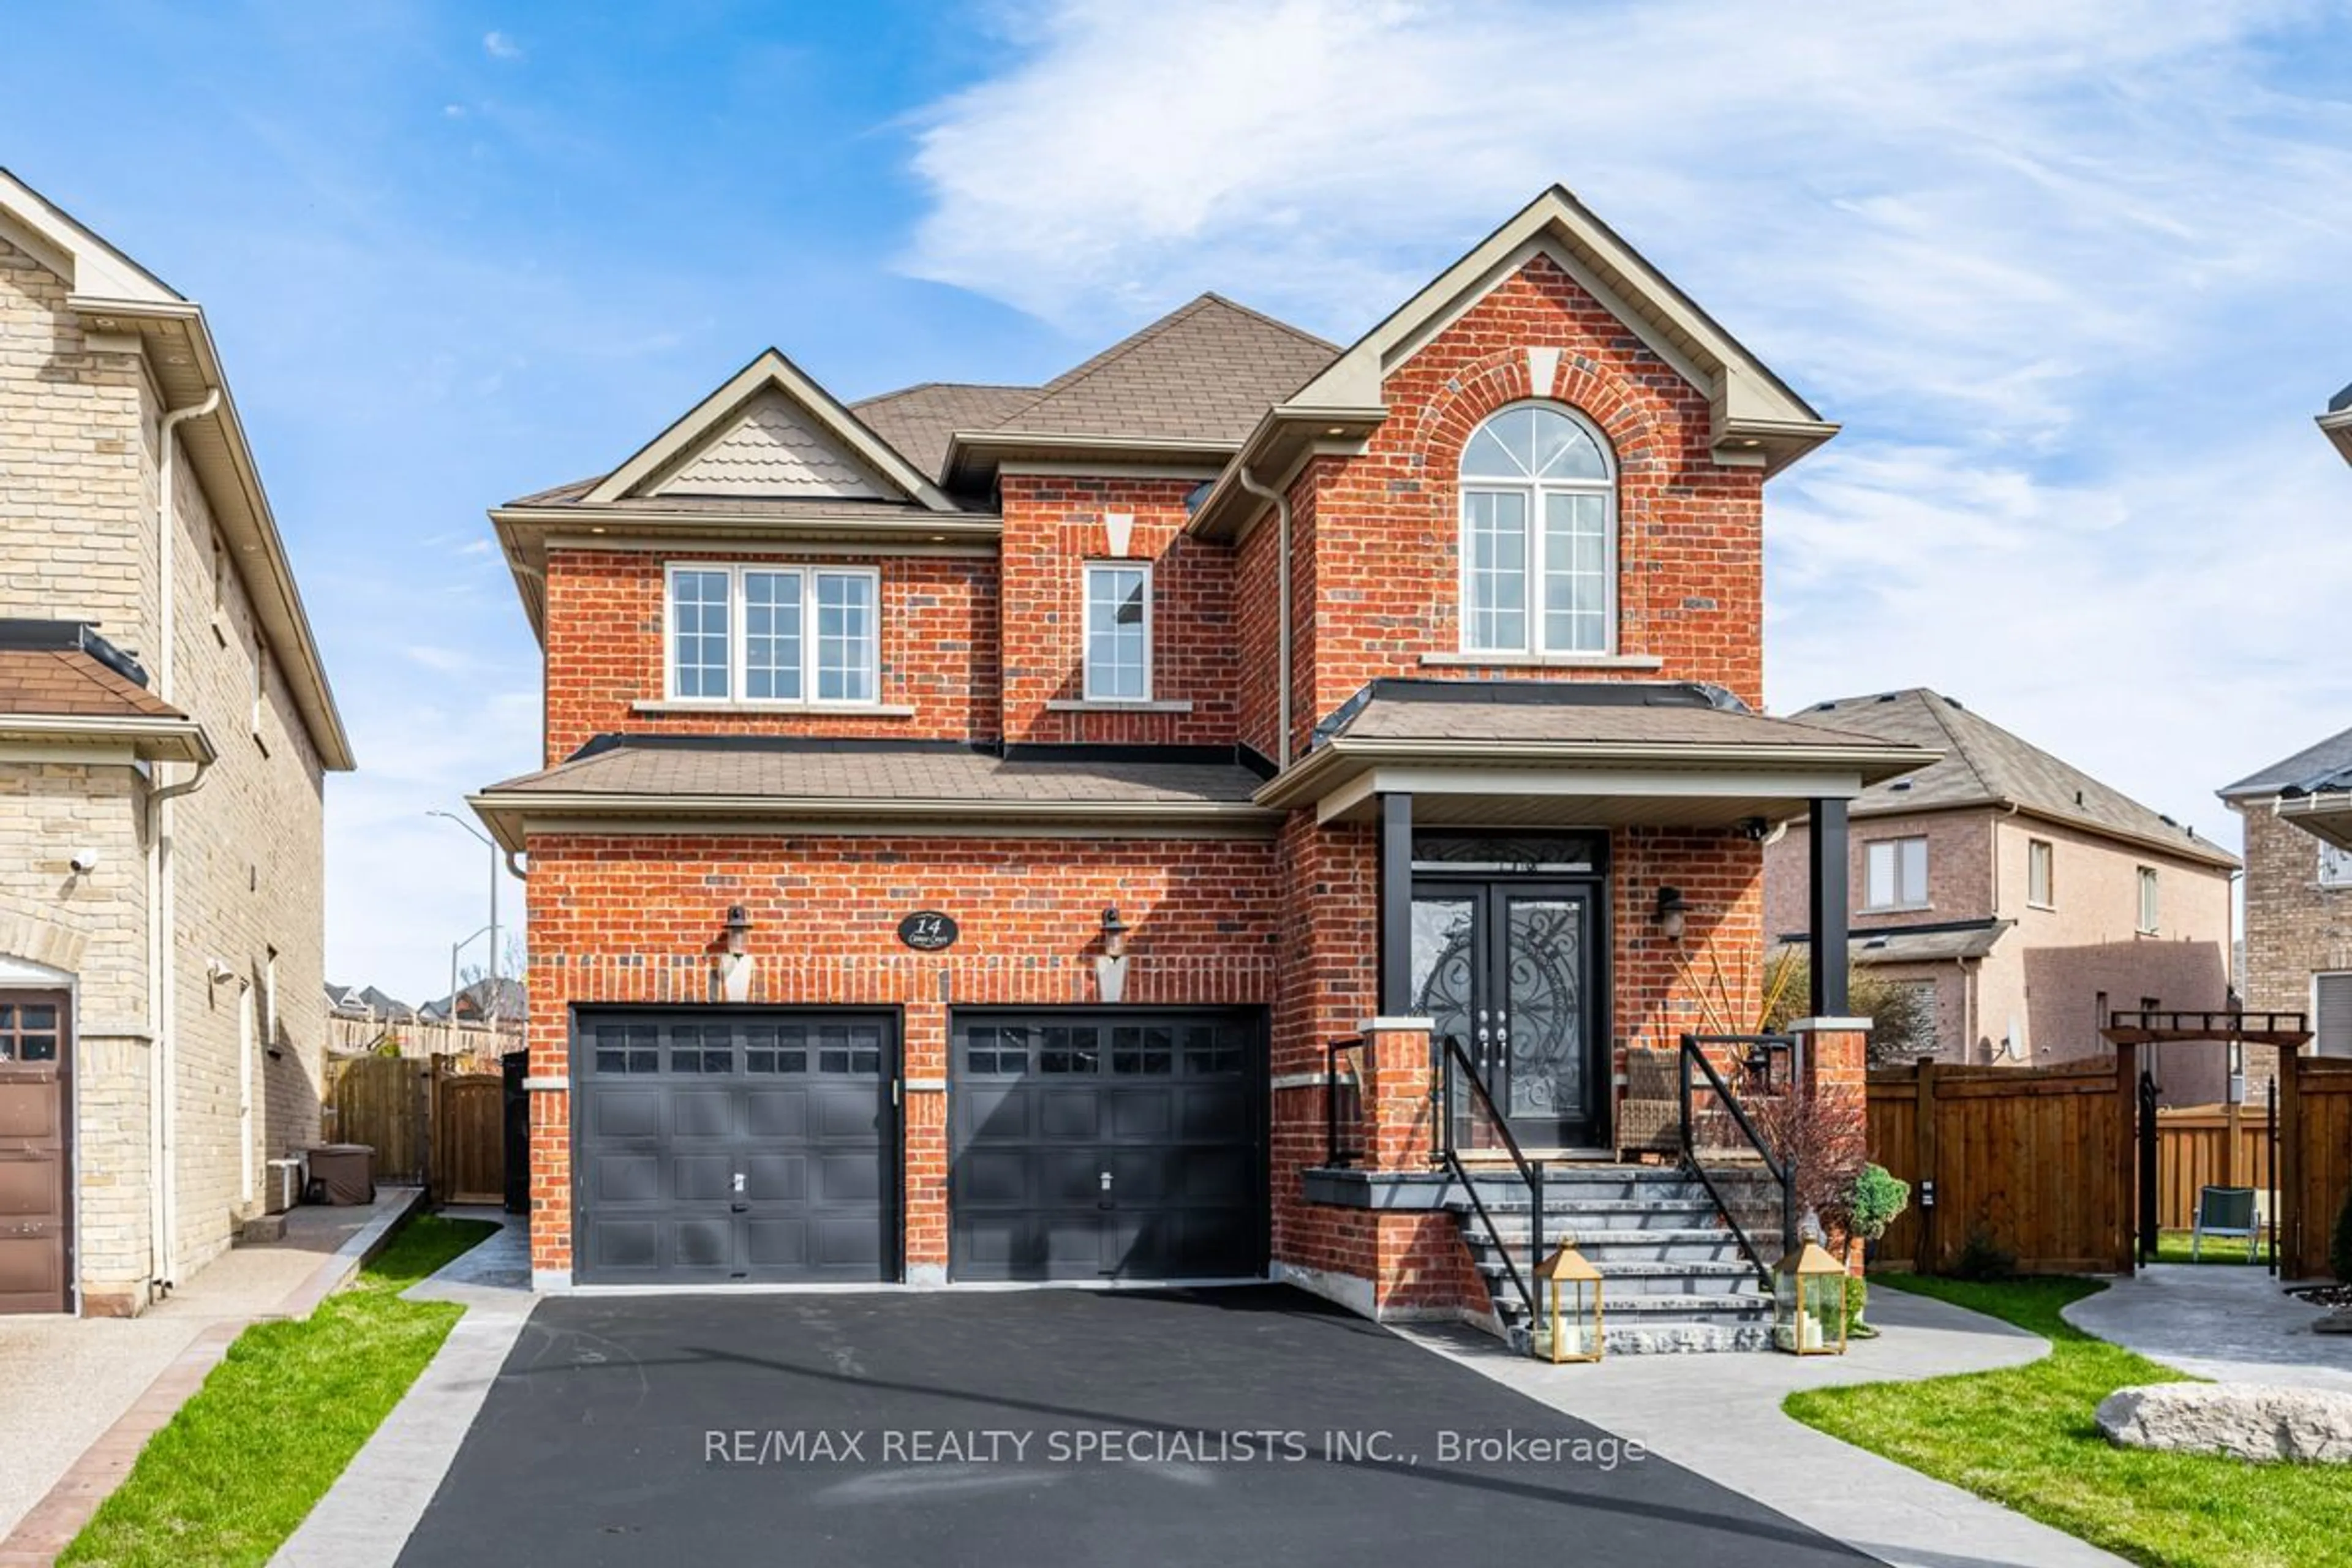 Home with brick exterior material for 14 Cameo Crt, Brampton Ontario L6Y 0N7